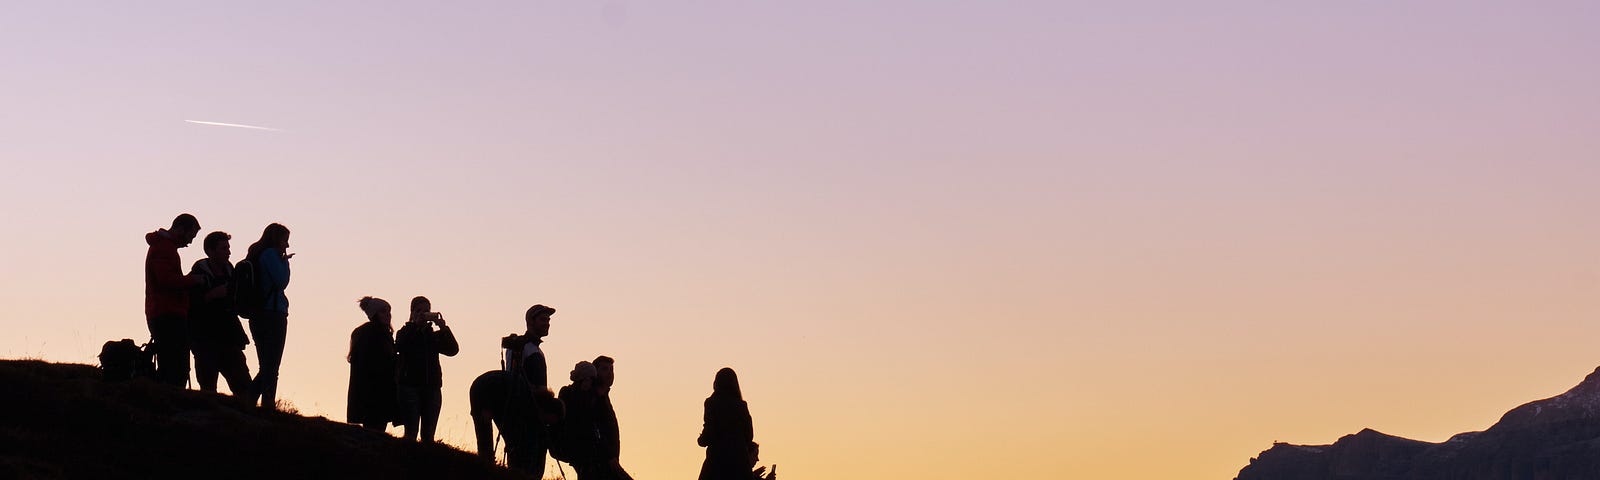 An image with people in the sunset